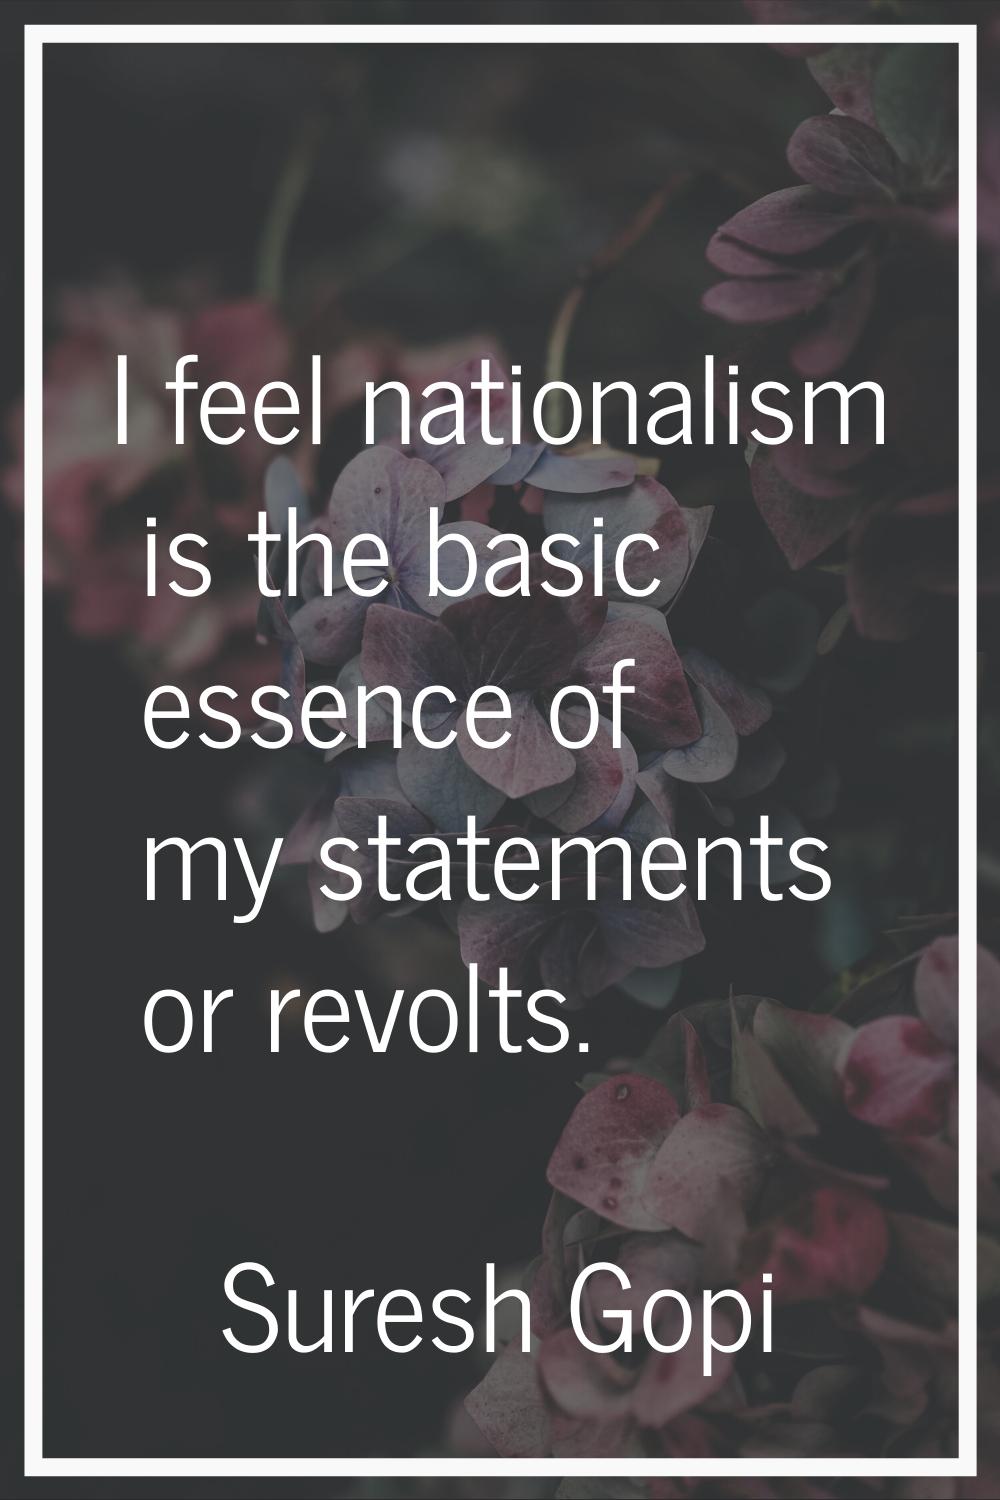 I feel nationalism is the basic essence of my statements or revolts.